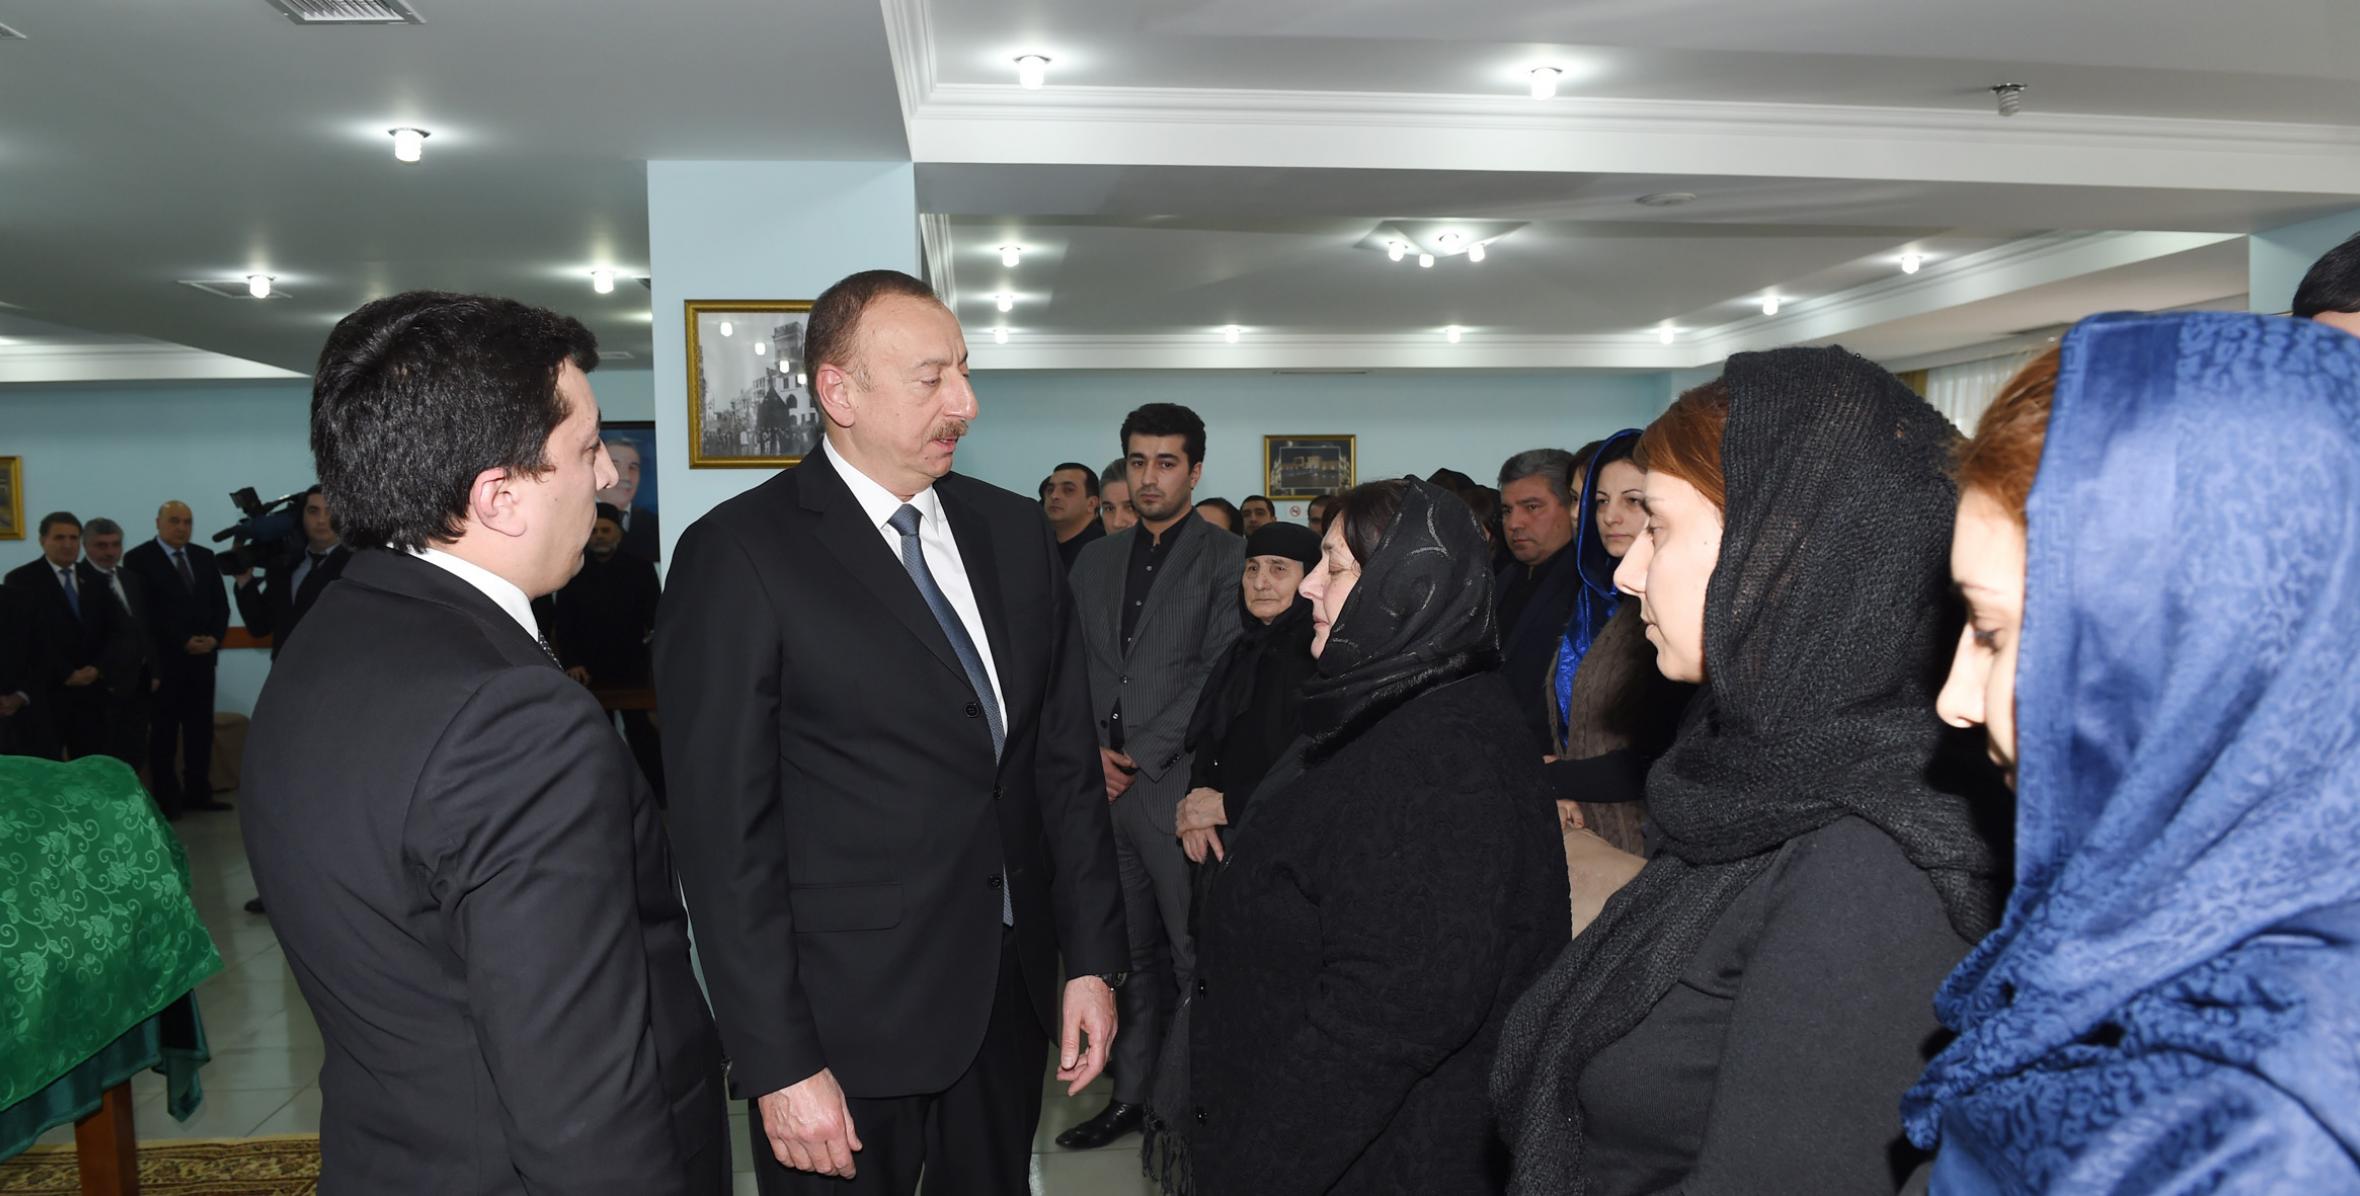 Ilham Aliyev attended a farewell ceremony for People's Poet Zalimkhan Yagub